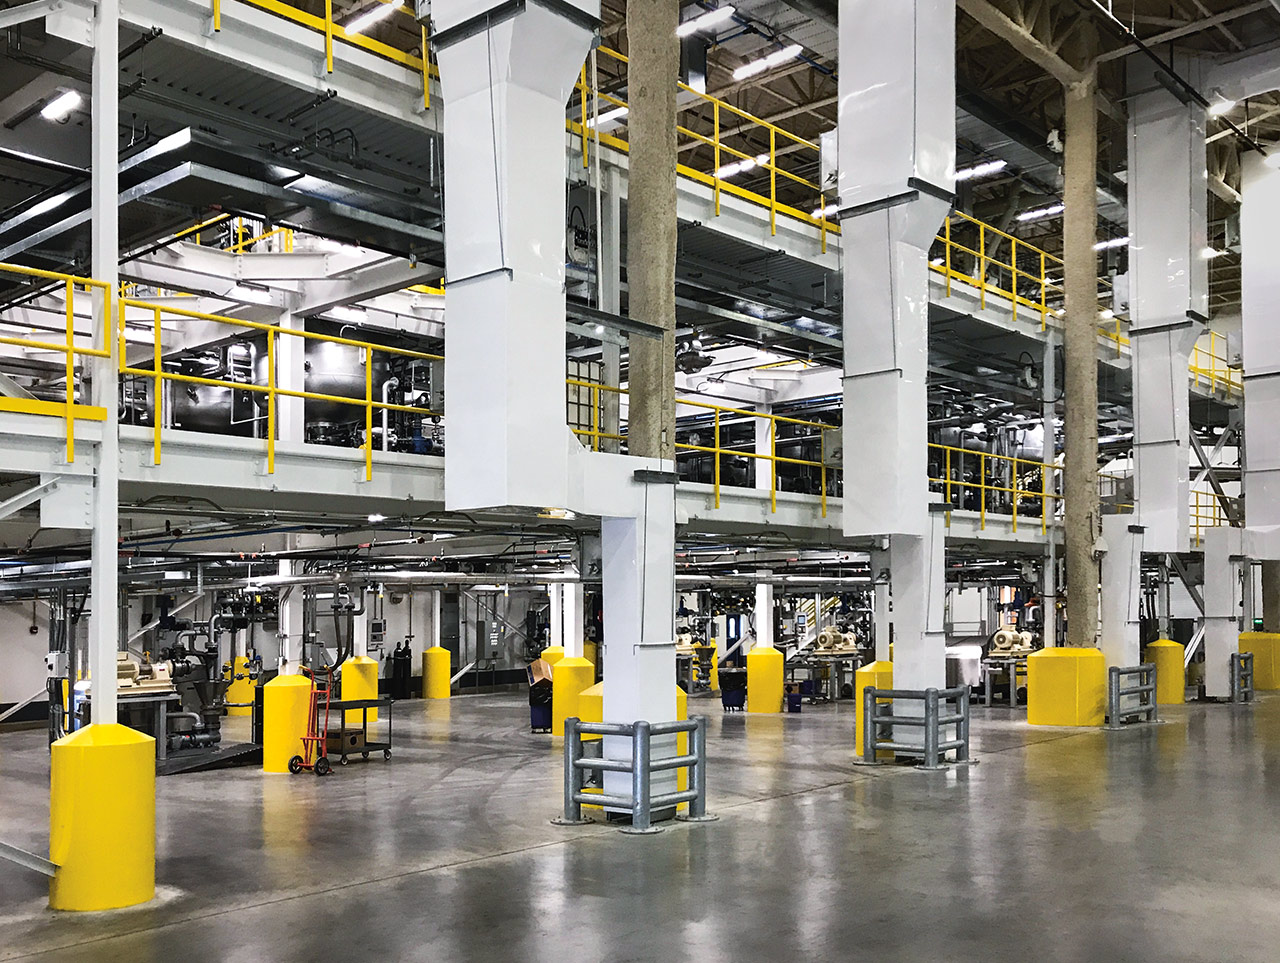 In 2017, the production of high-quality specialty greases for North American customers began in the new facilities in Chicago.